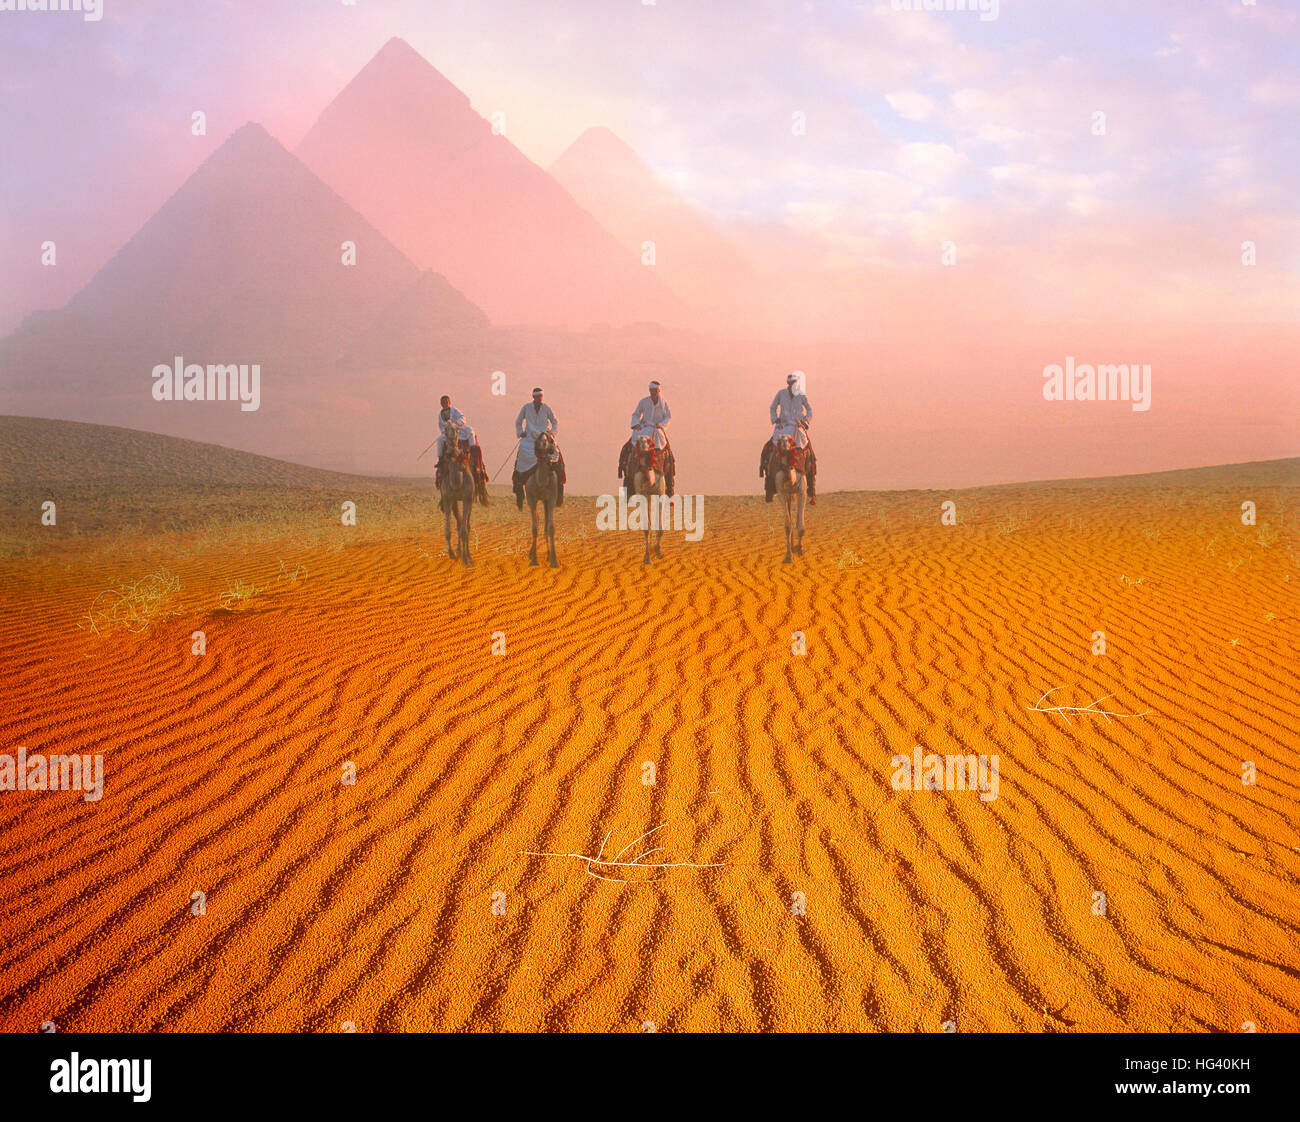 The Pyramids and four camel riders at dawn on the Giza Plateau, Cairo, Egypt Stock Photo